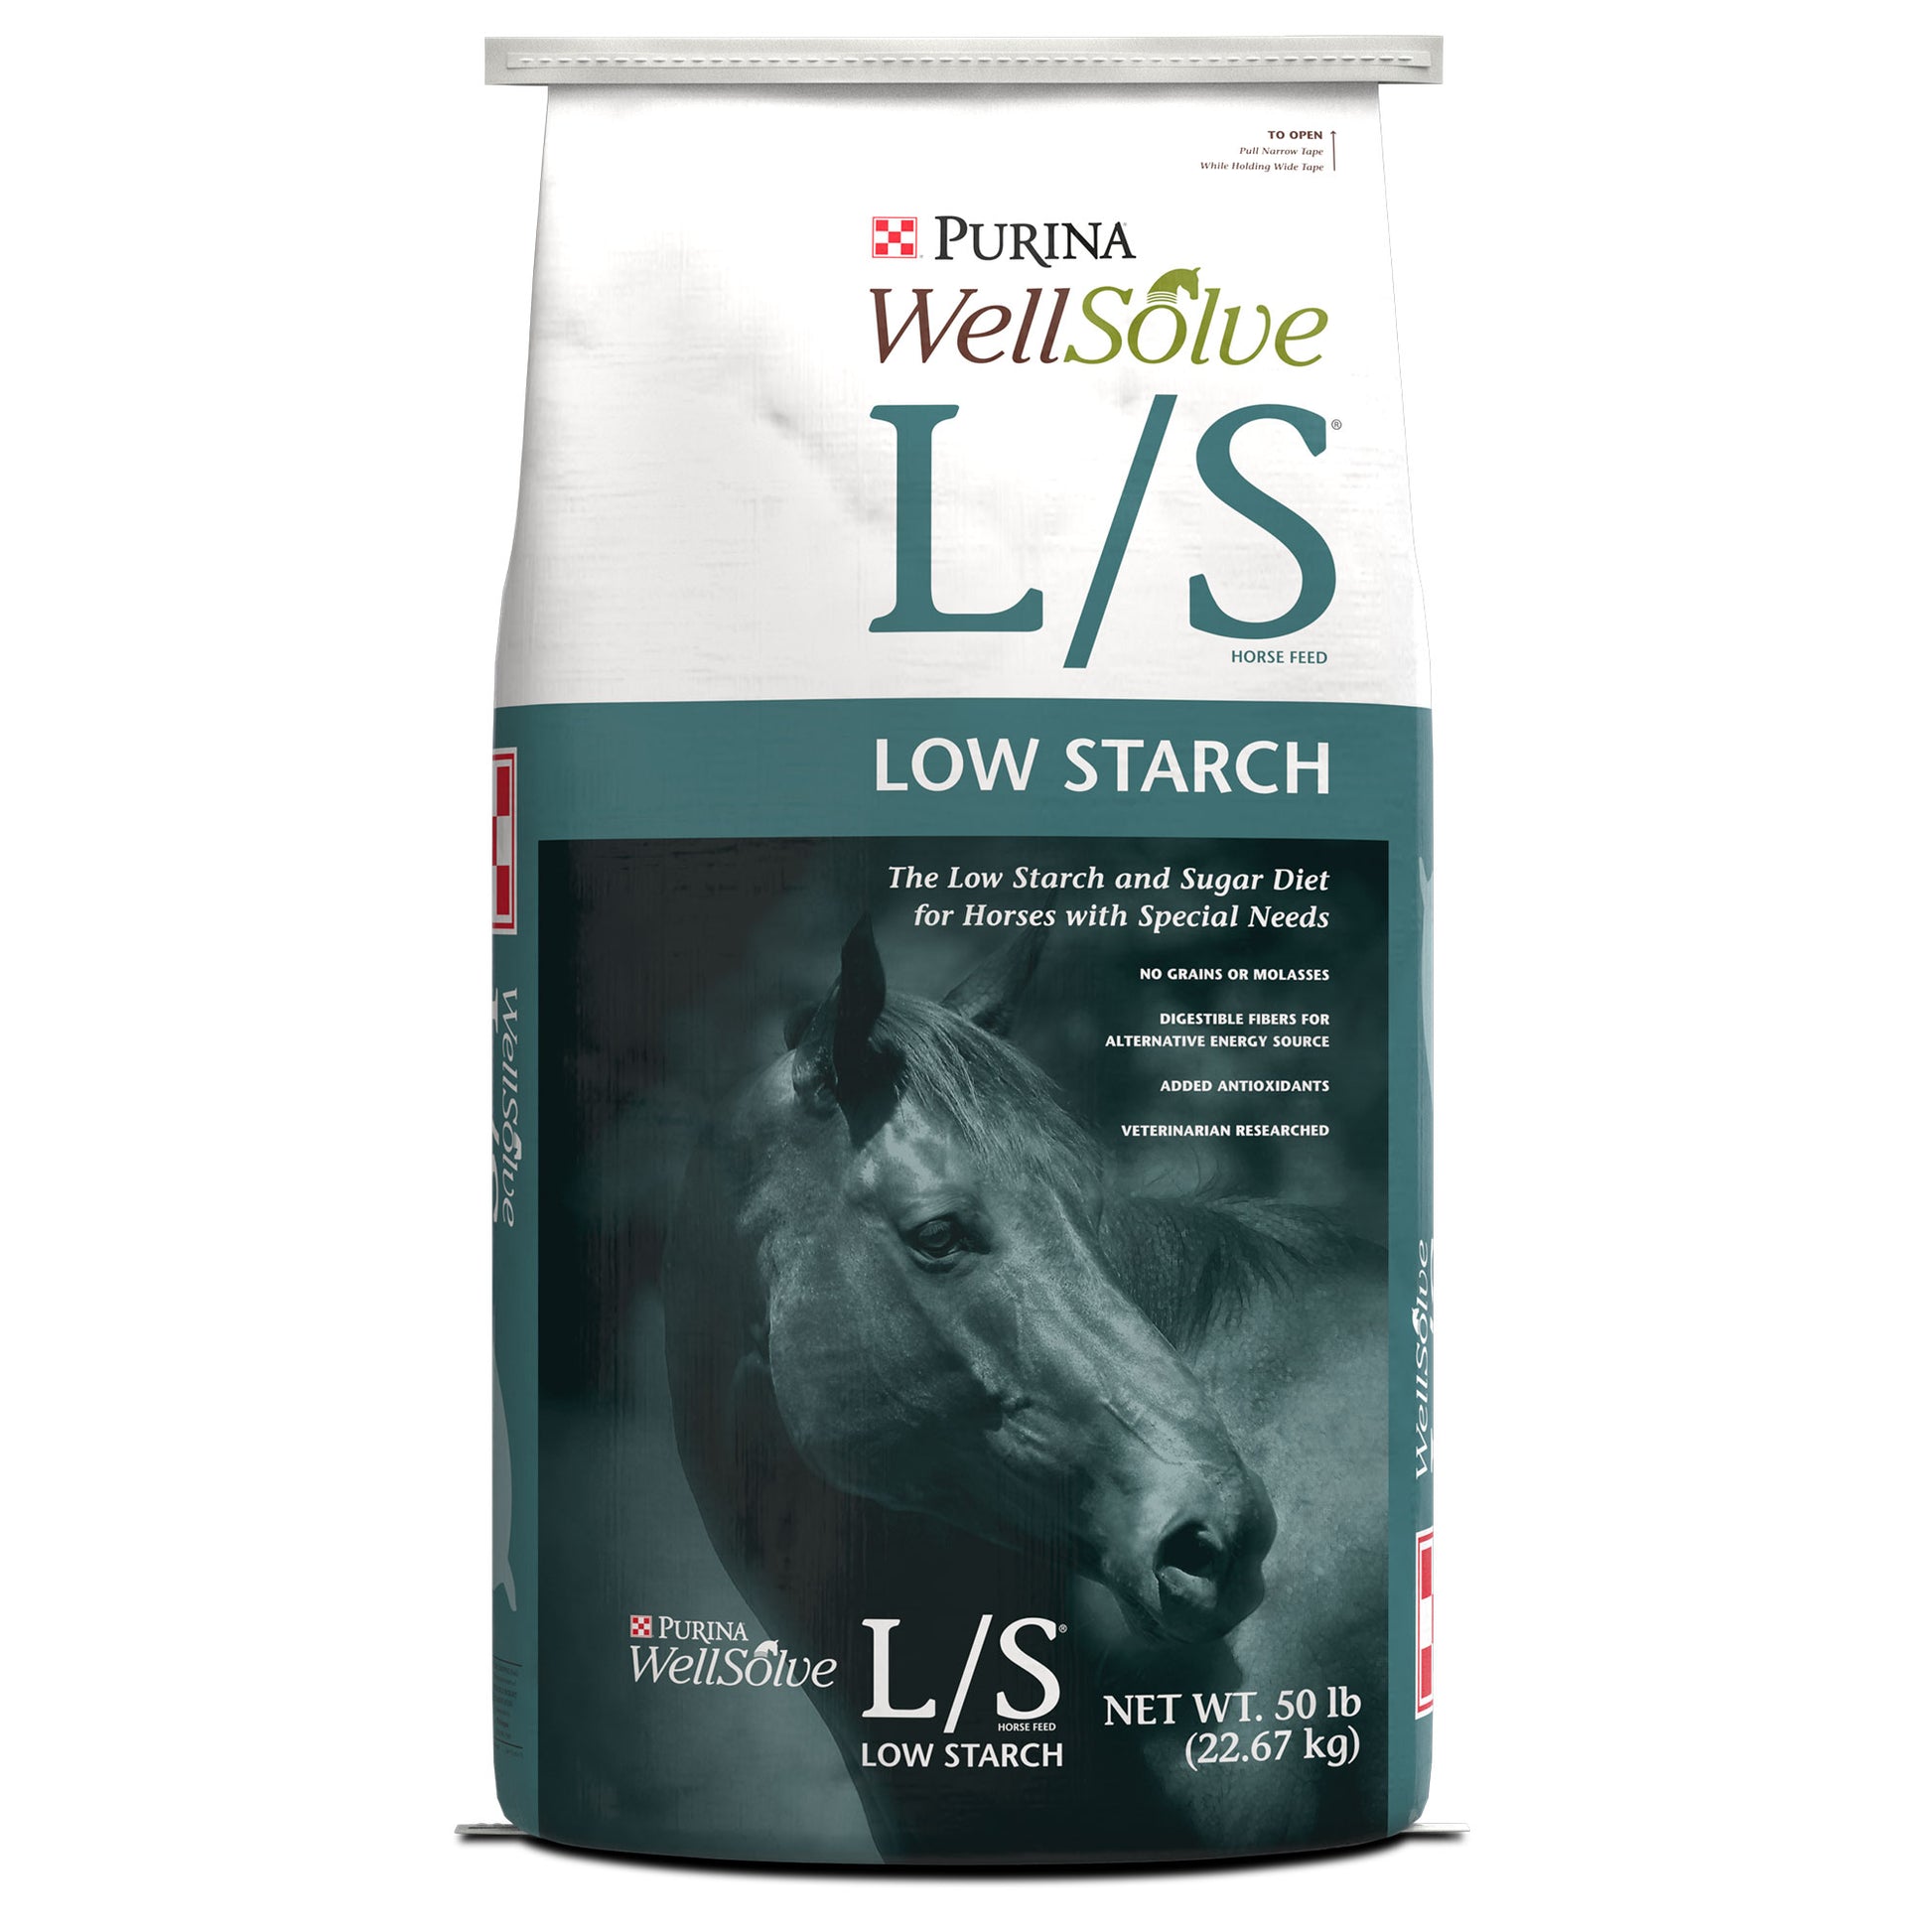 Purina WellSolve Low Starch Horse Feed